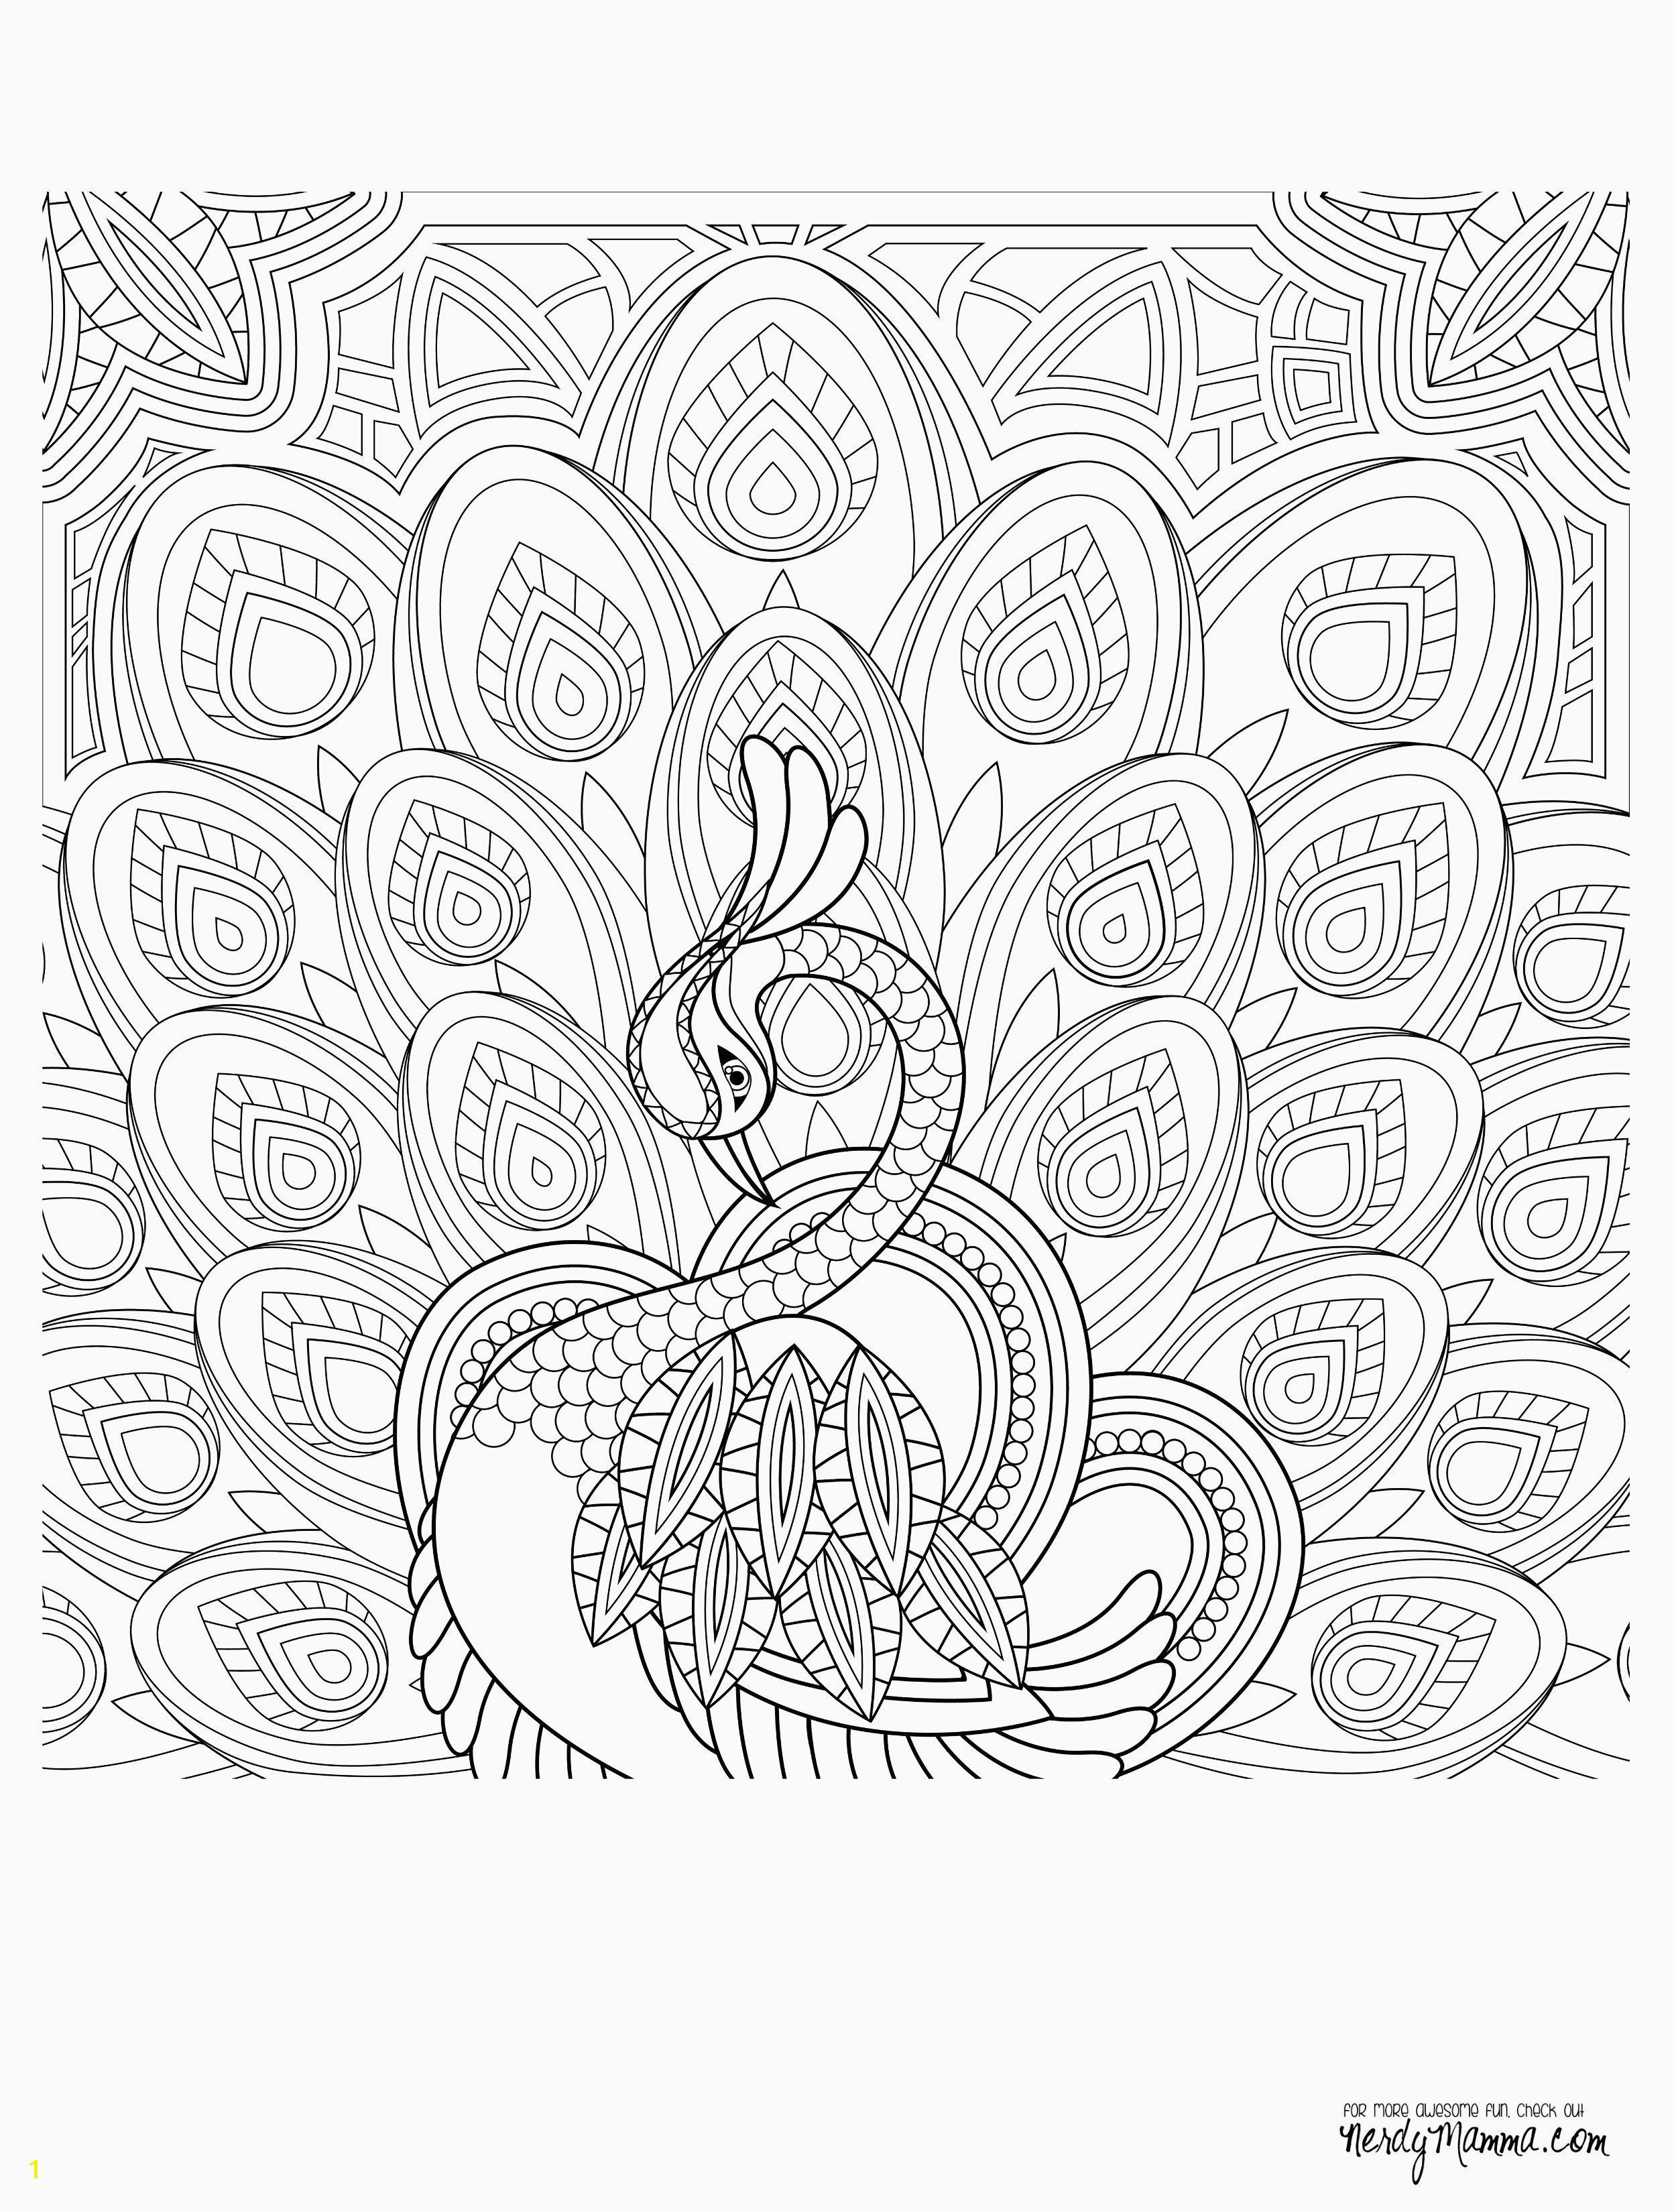 Cool Coloring Pages for Teenagers to Print Free Printable Coloring Pages for Adults Best Awesome Coloring